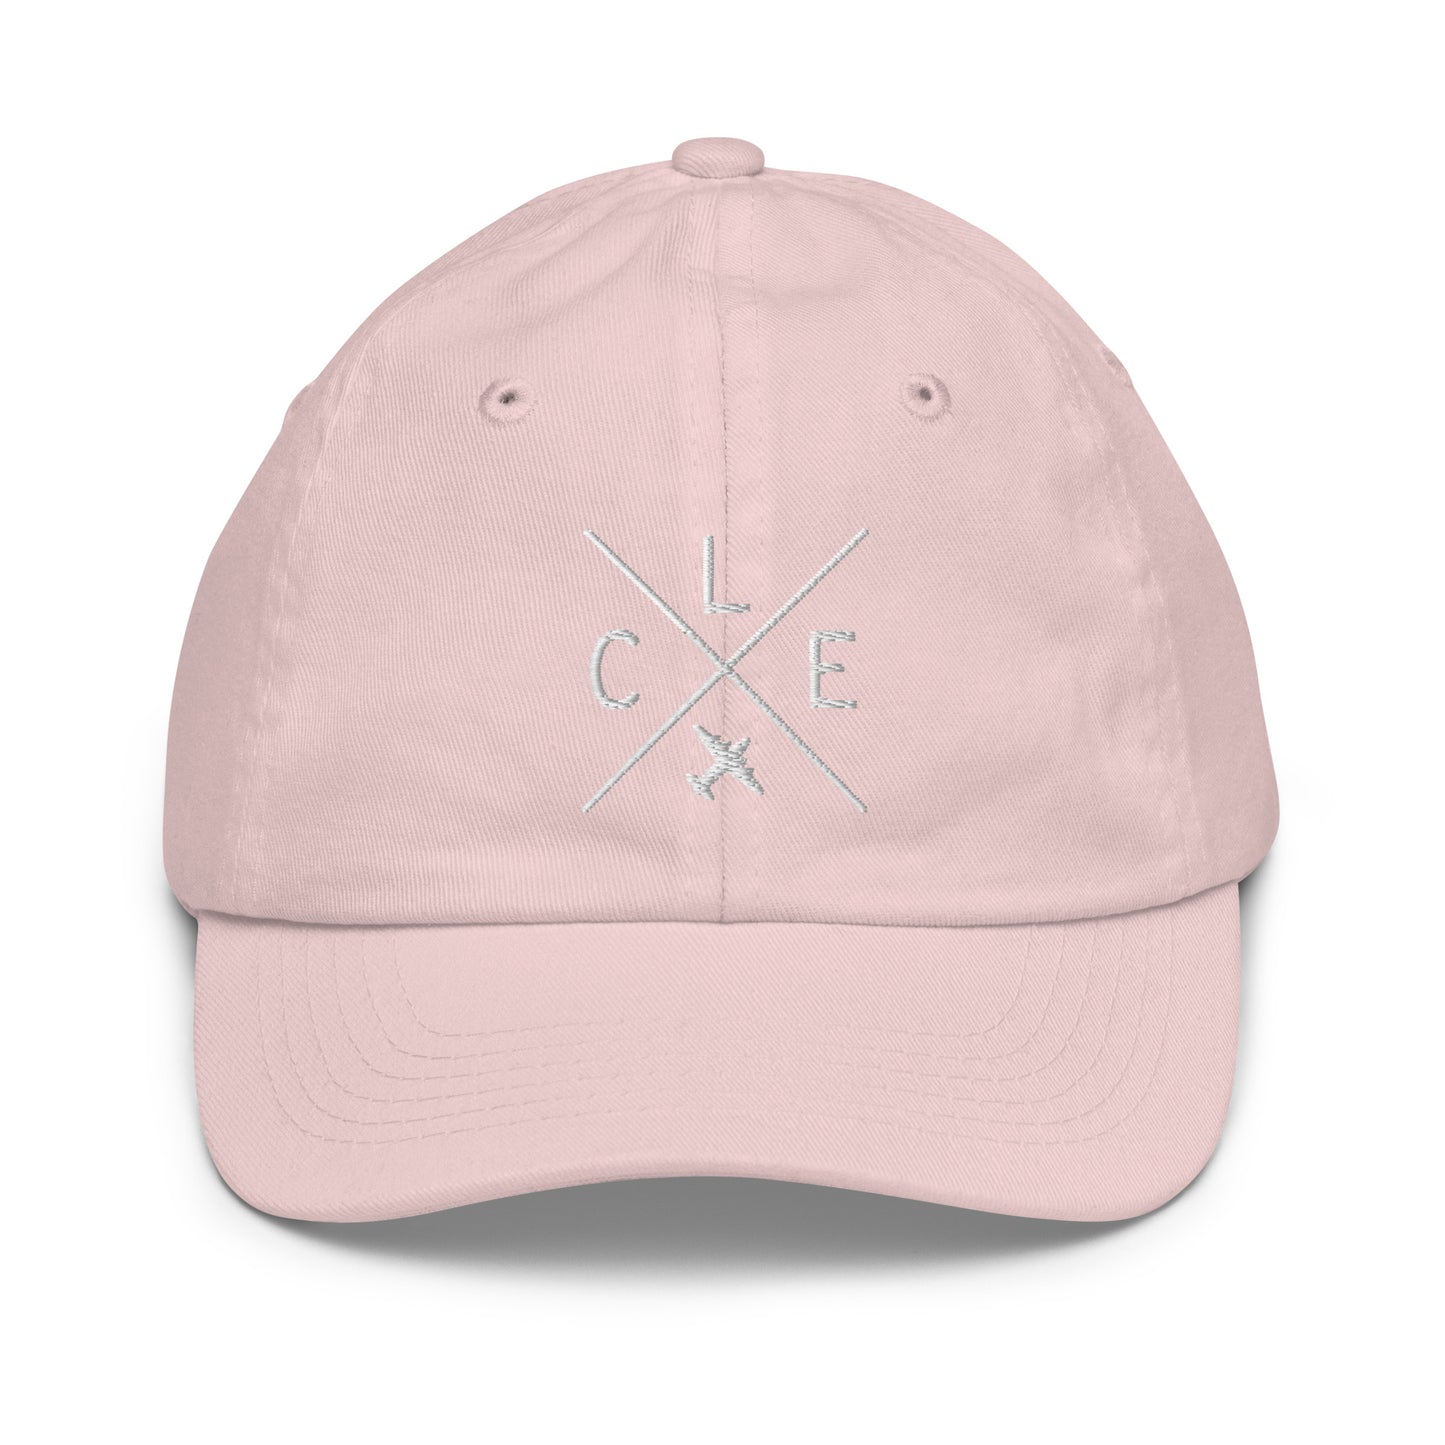 Crossed-X Kid's Baseball Cap - White • CLE Cleveland • YHM Designs - Image 31